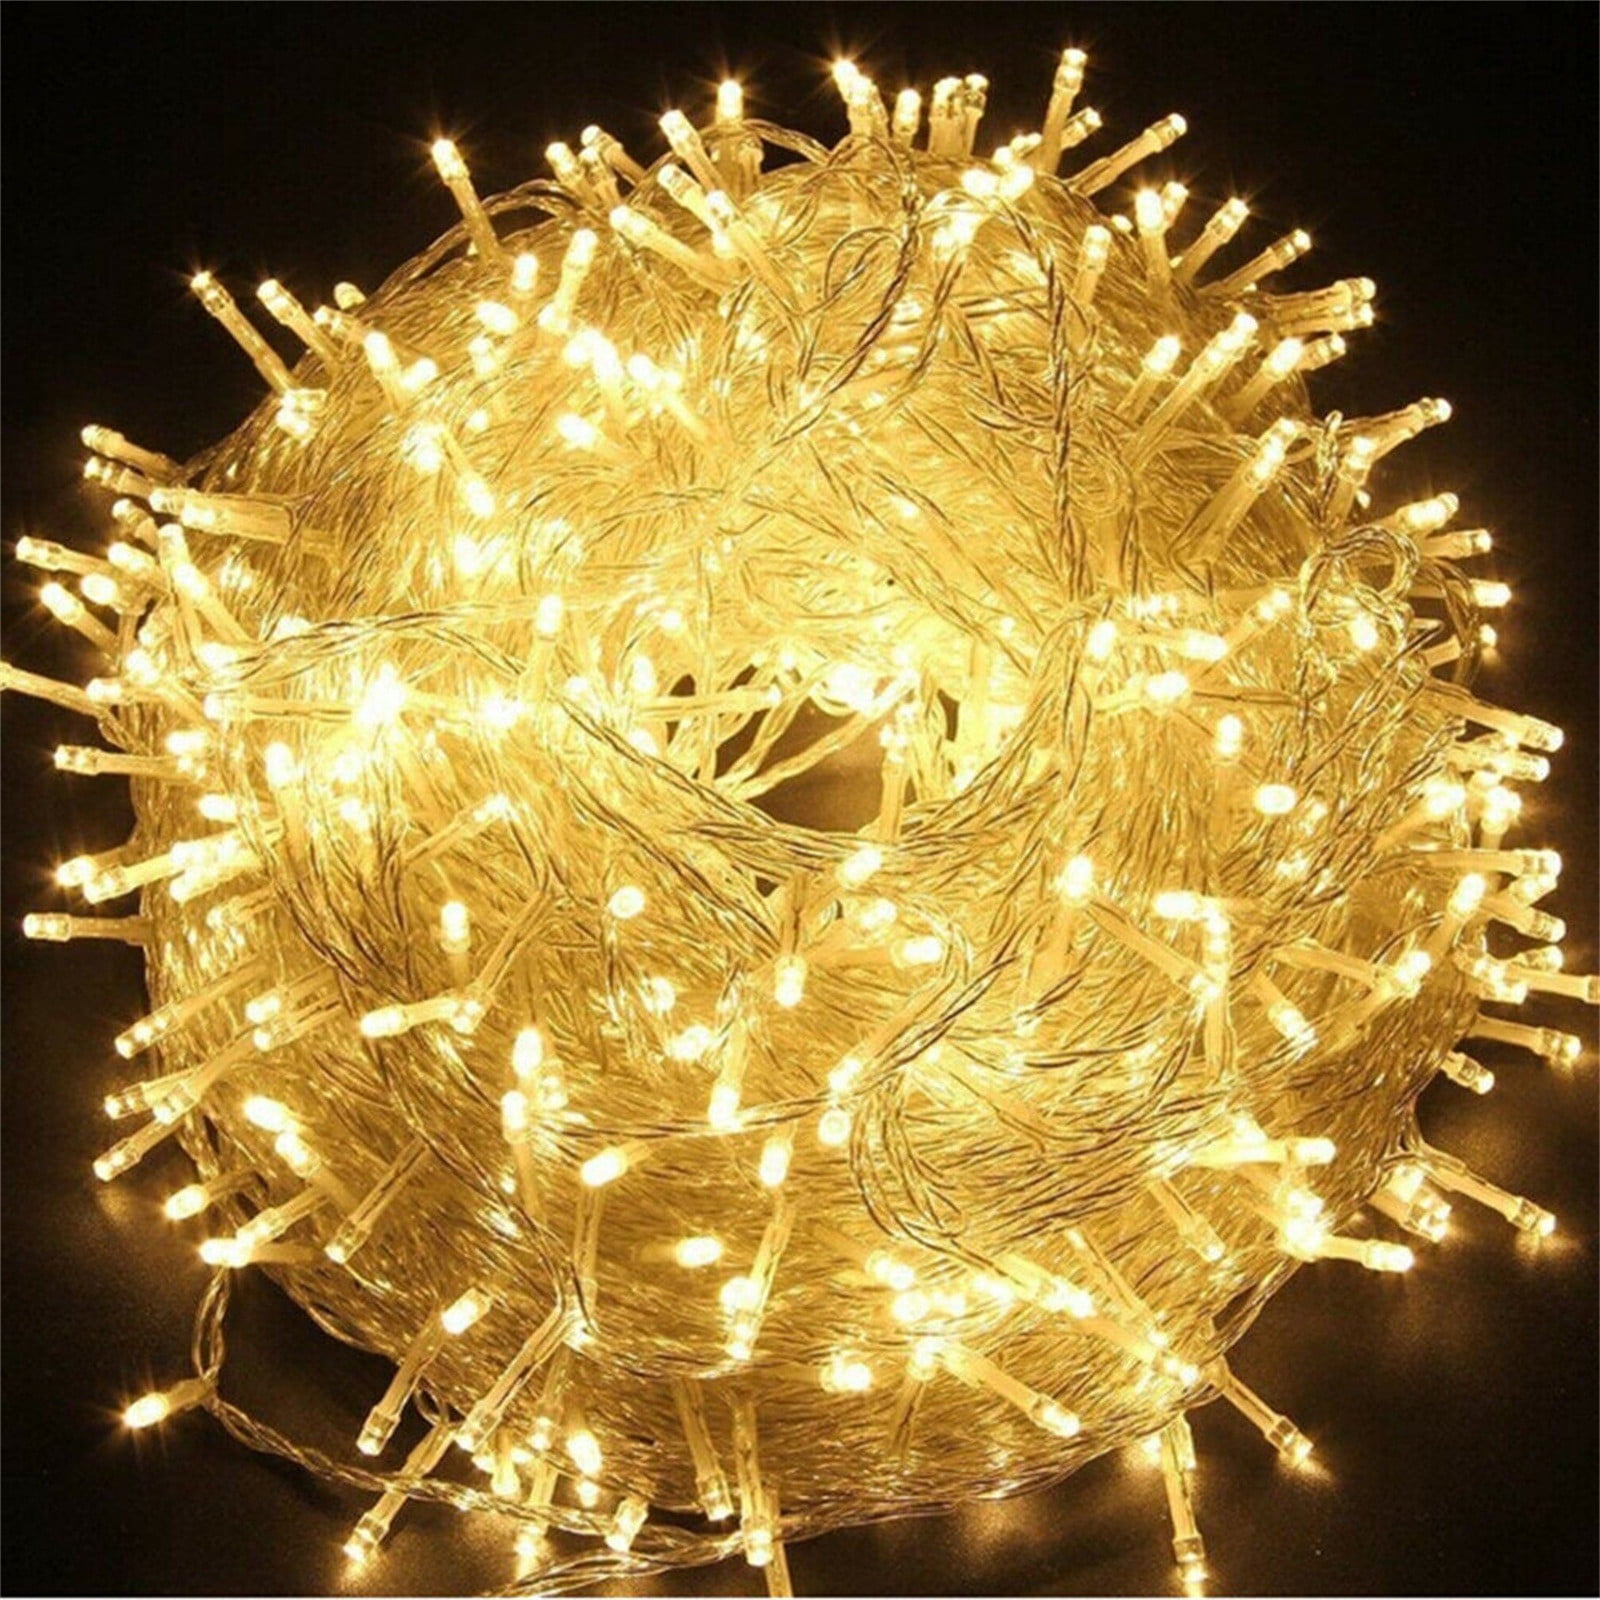 10M 100 LED Christmas Wedding Xmas Party Outdoor Fairy String Light Decoration 